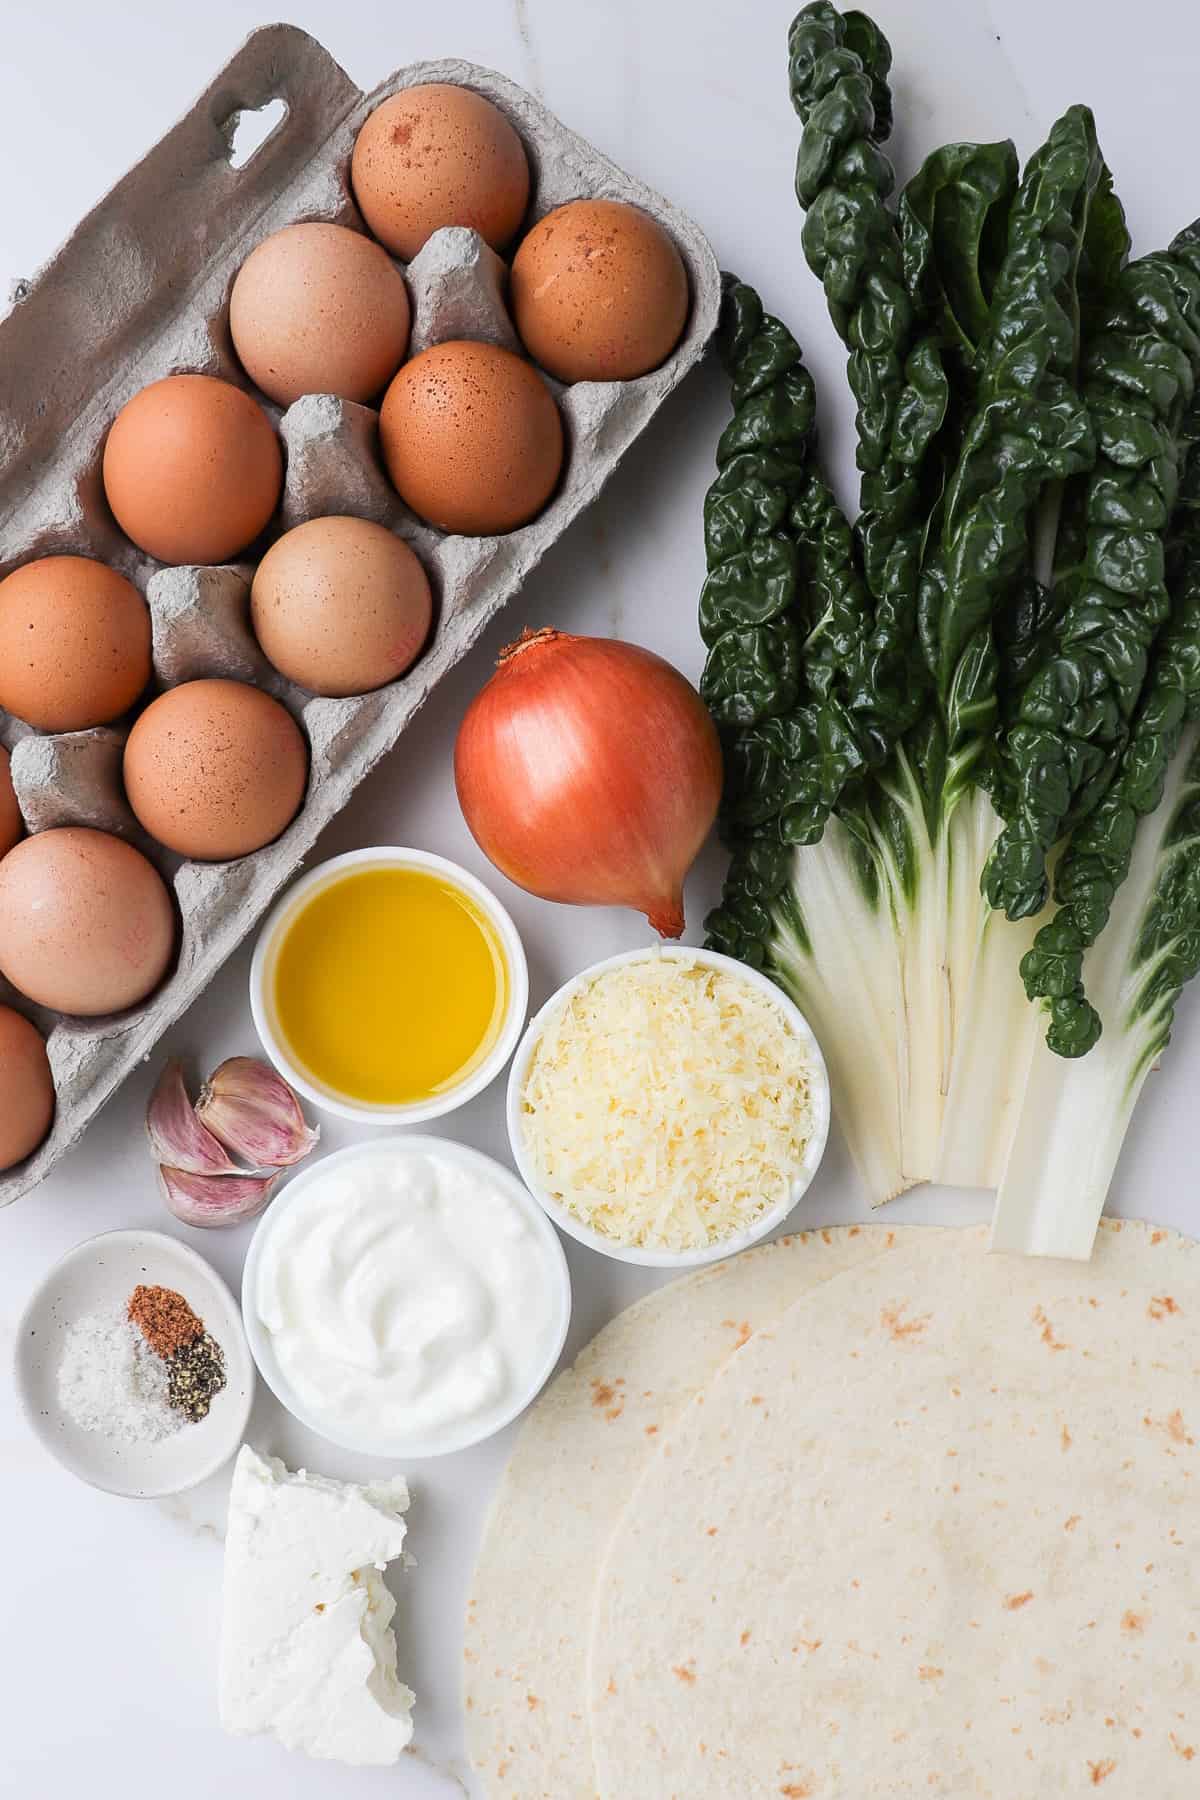 Ingredients shown to make a silverbeet quiche.